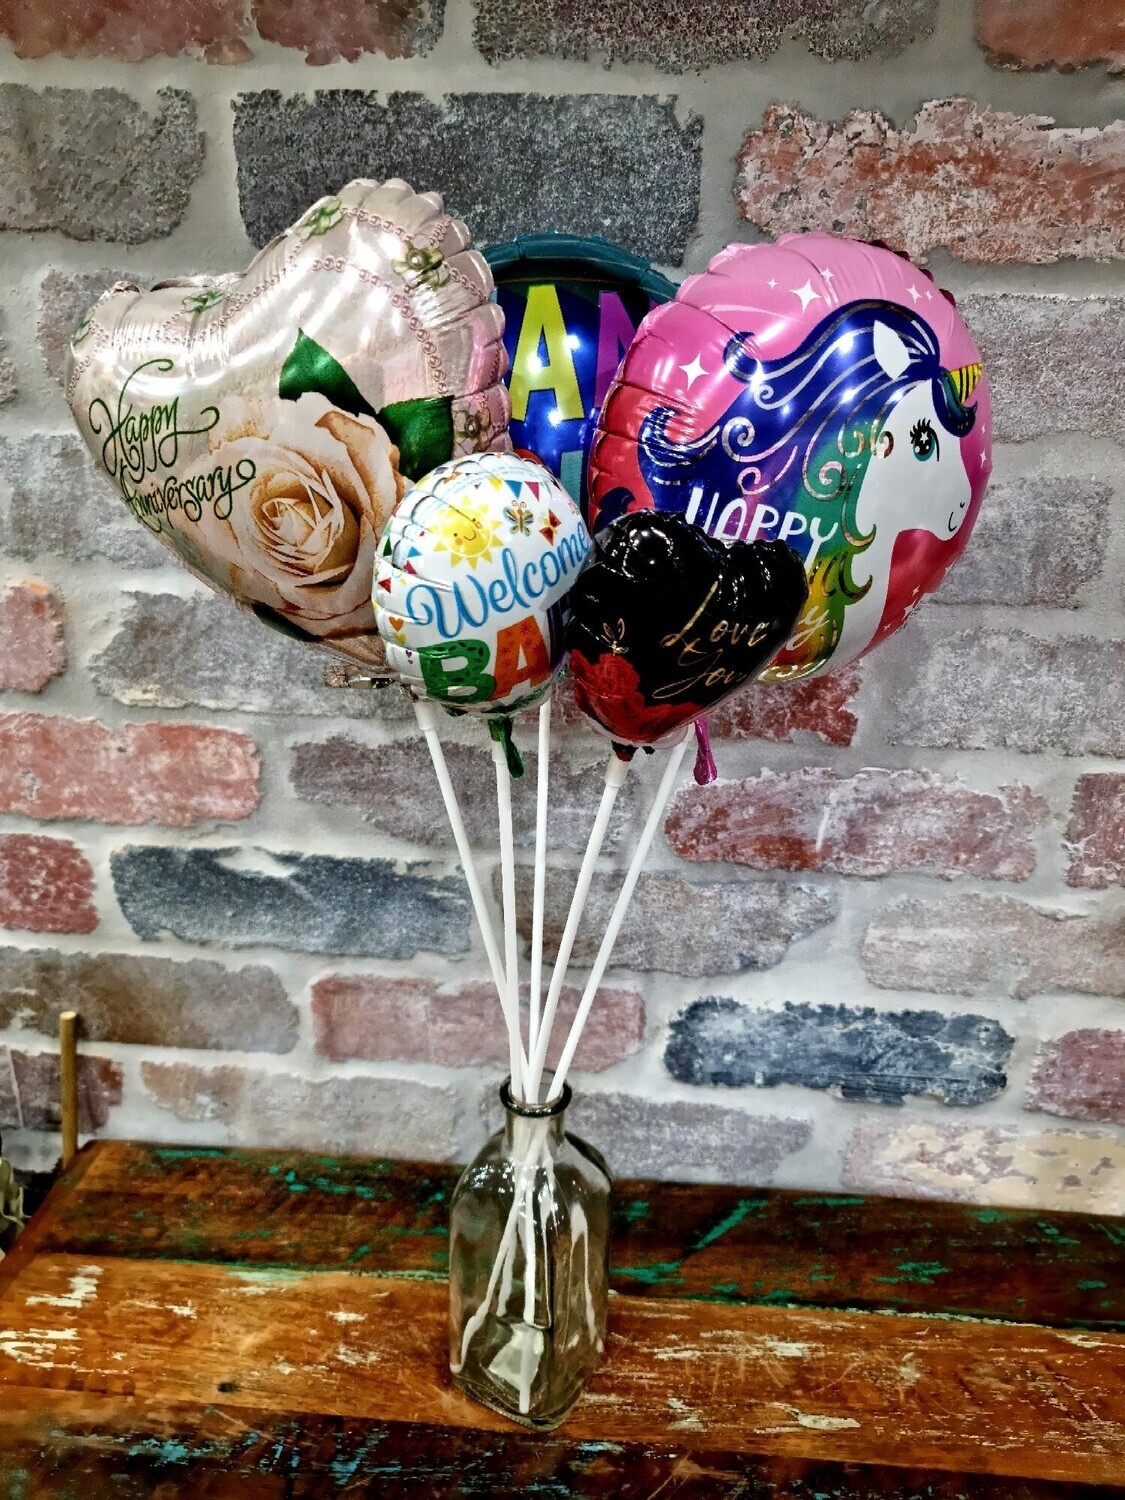 Small air balloons on stick